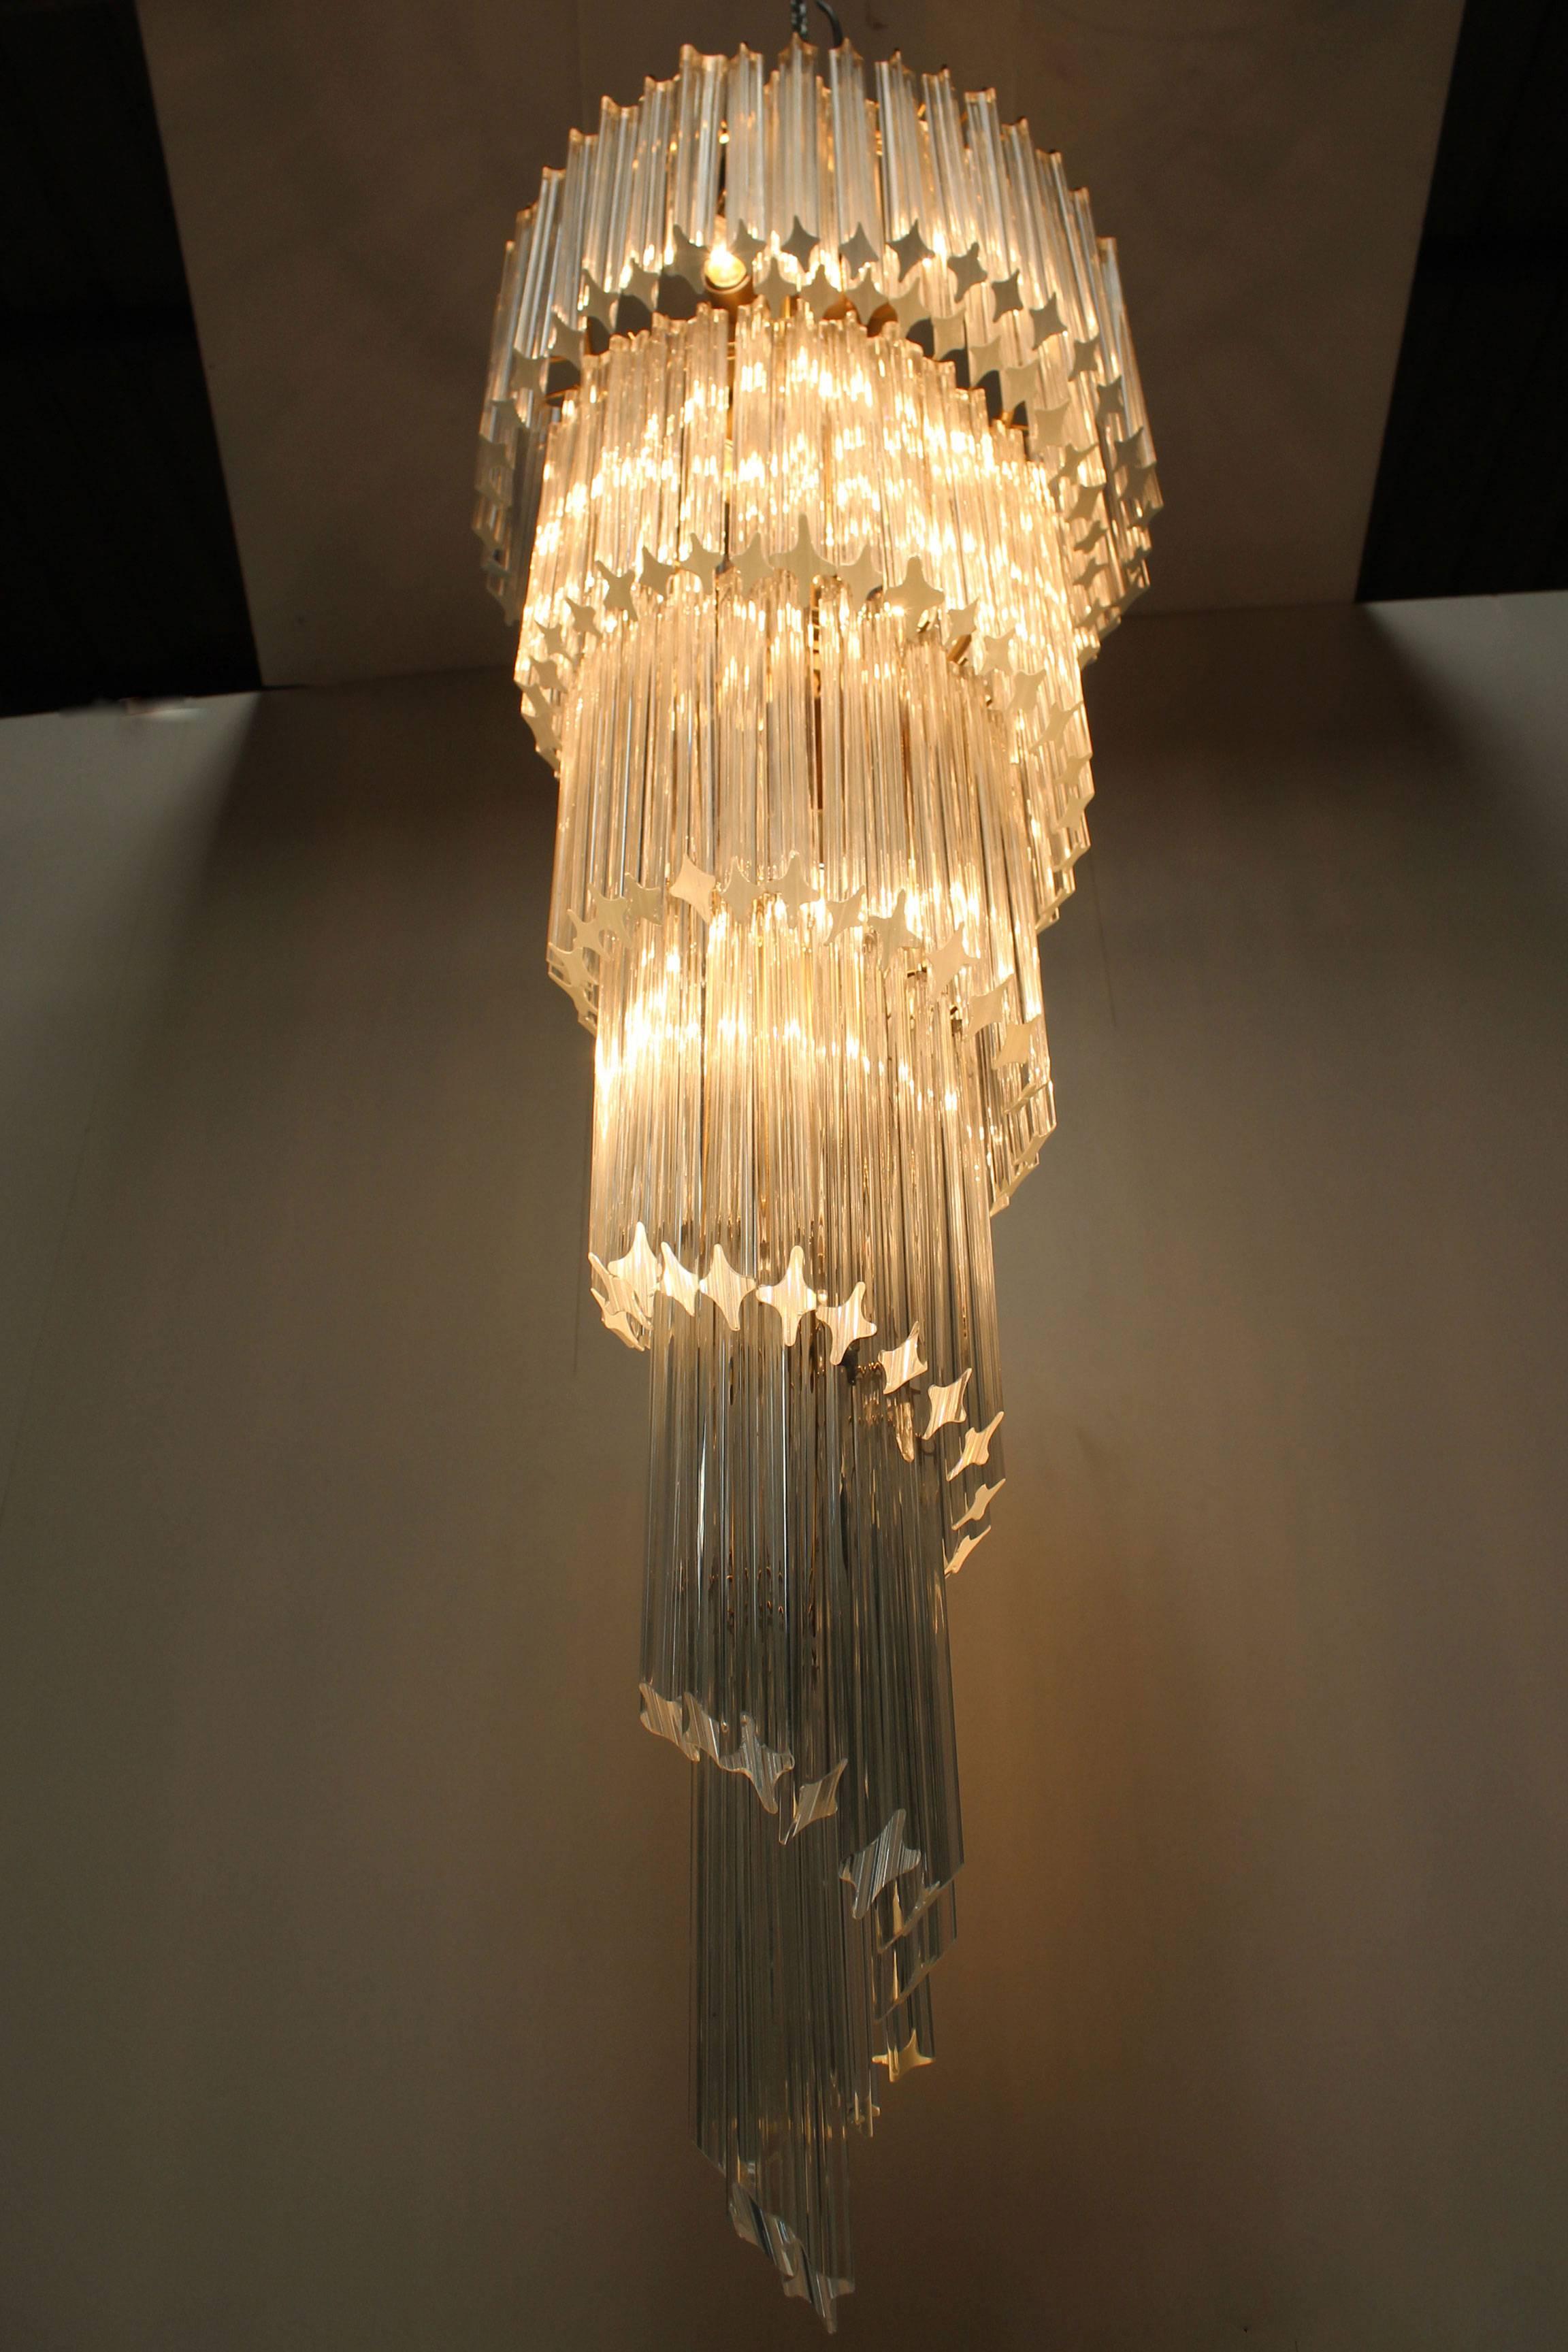 Large and stunning Italian Mid-Century crystal prism spiral chandelier by Paolo Venini, 1960. This large chandelier has a spiral shaped brass frame which is decorated with 166 handmade crystal glass prisms. The chandelier has 14 sockets and looks